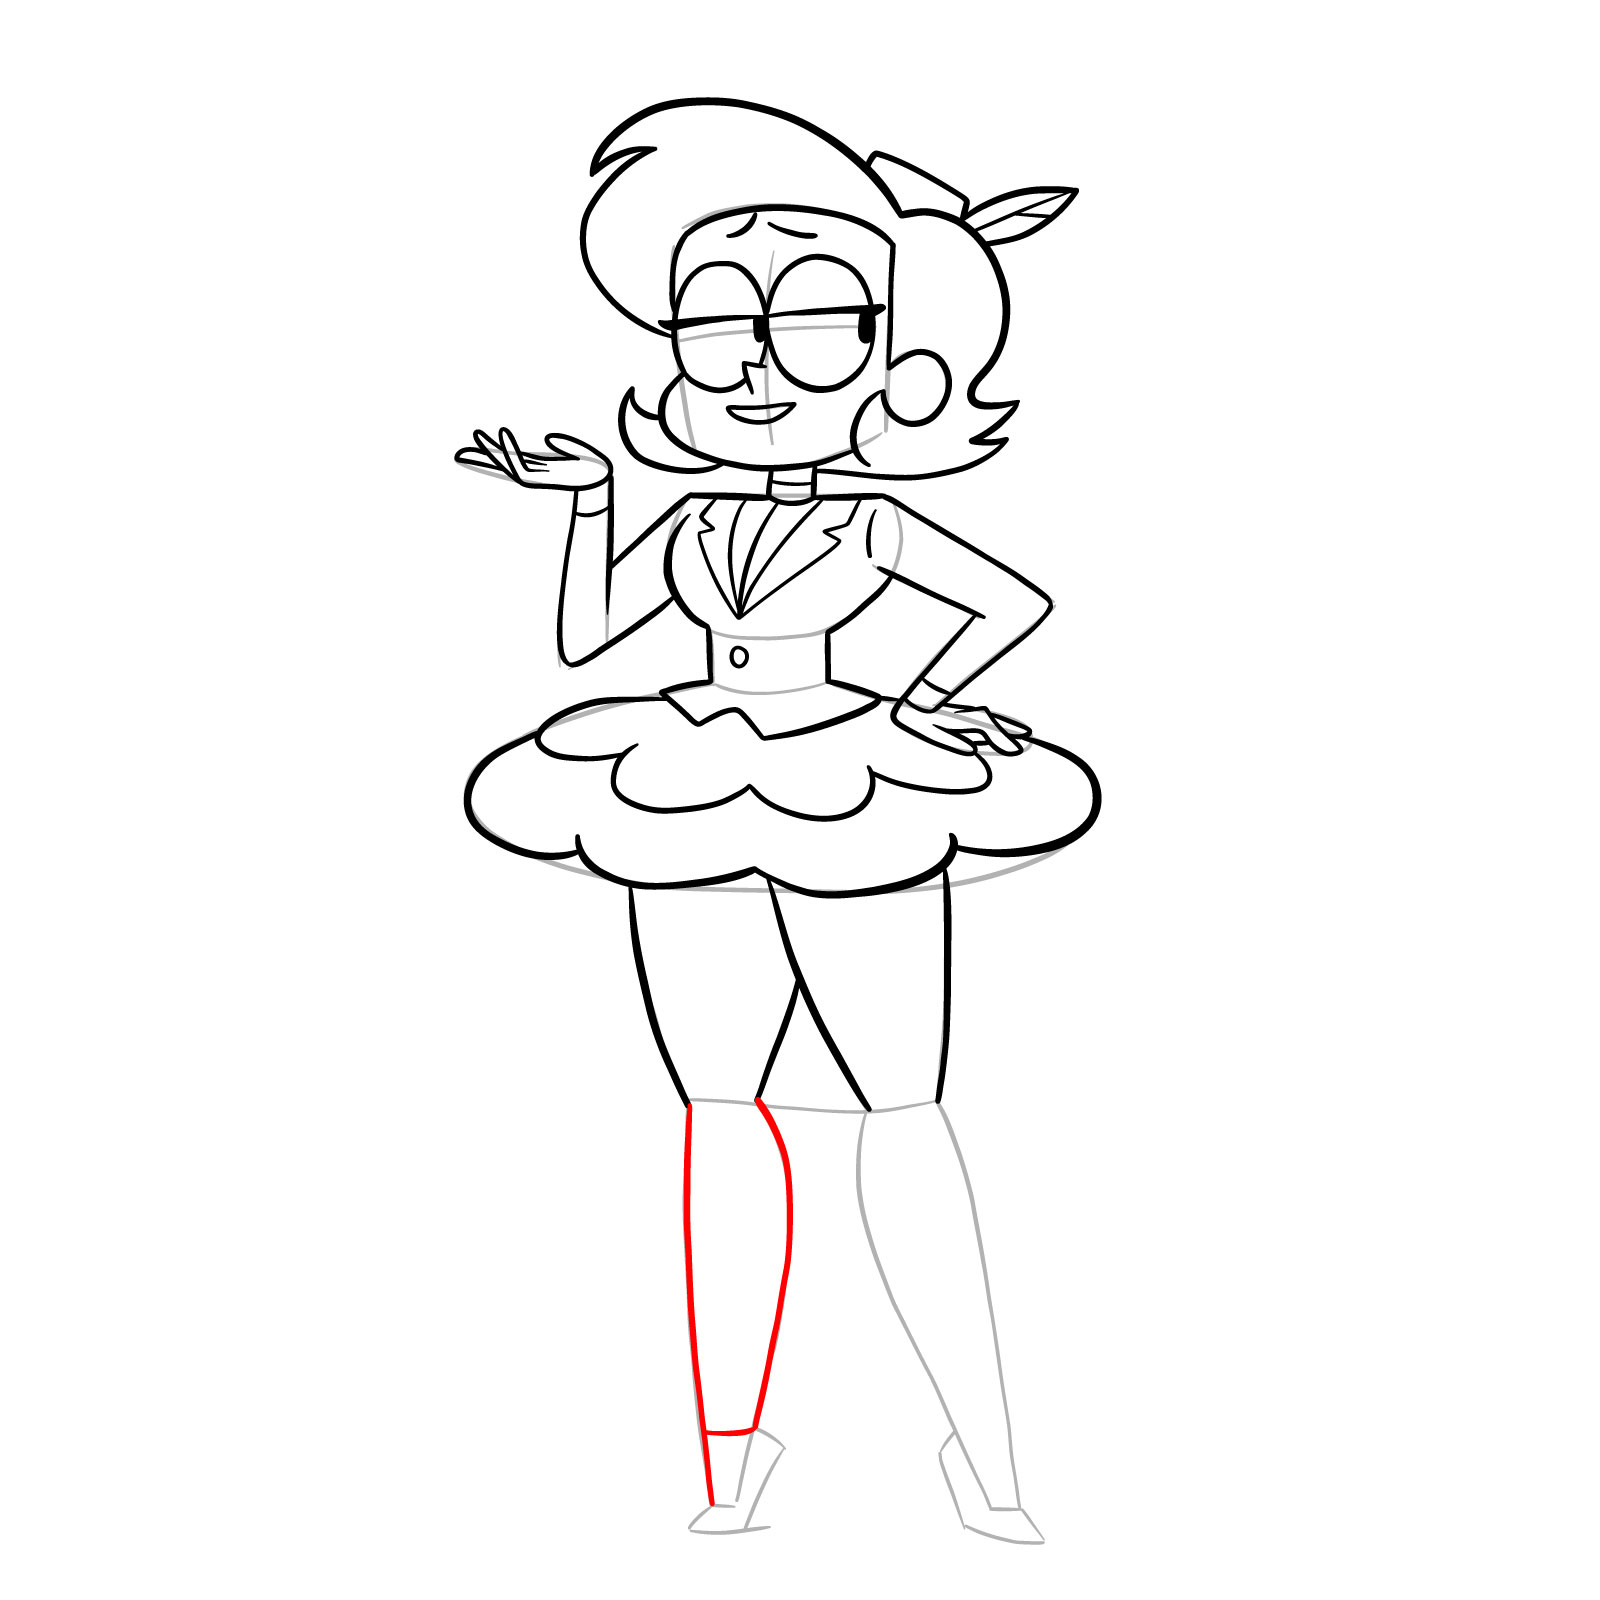 How to draw Elodie from OK K.O.! - step 32